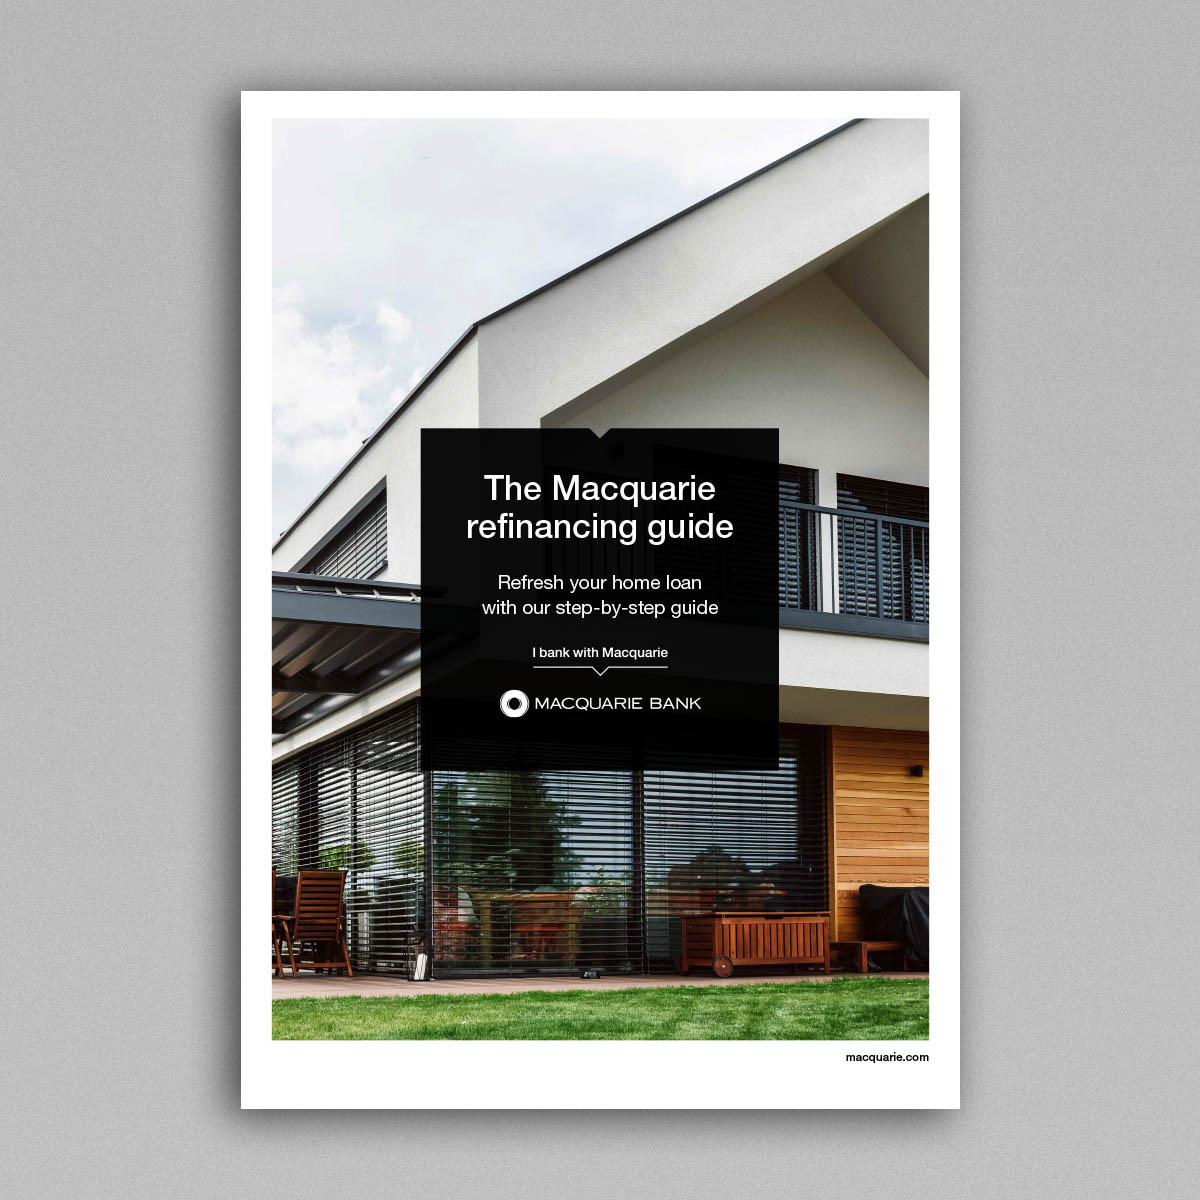 Image of front cover of Macquarie home loan refinance guide on a grey background